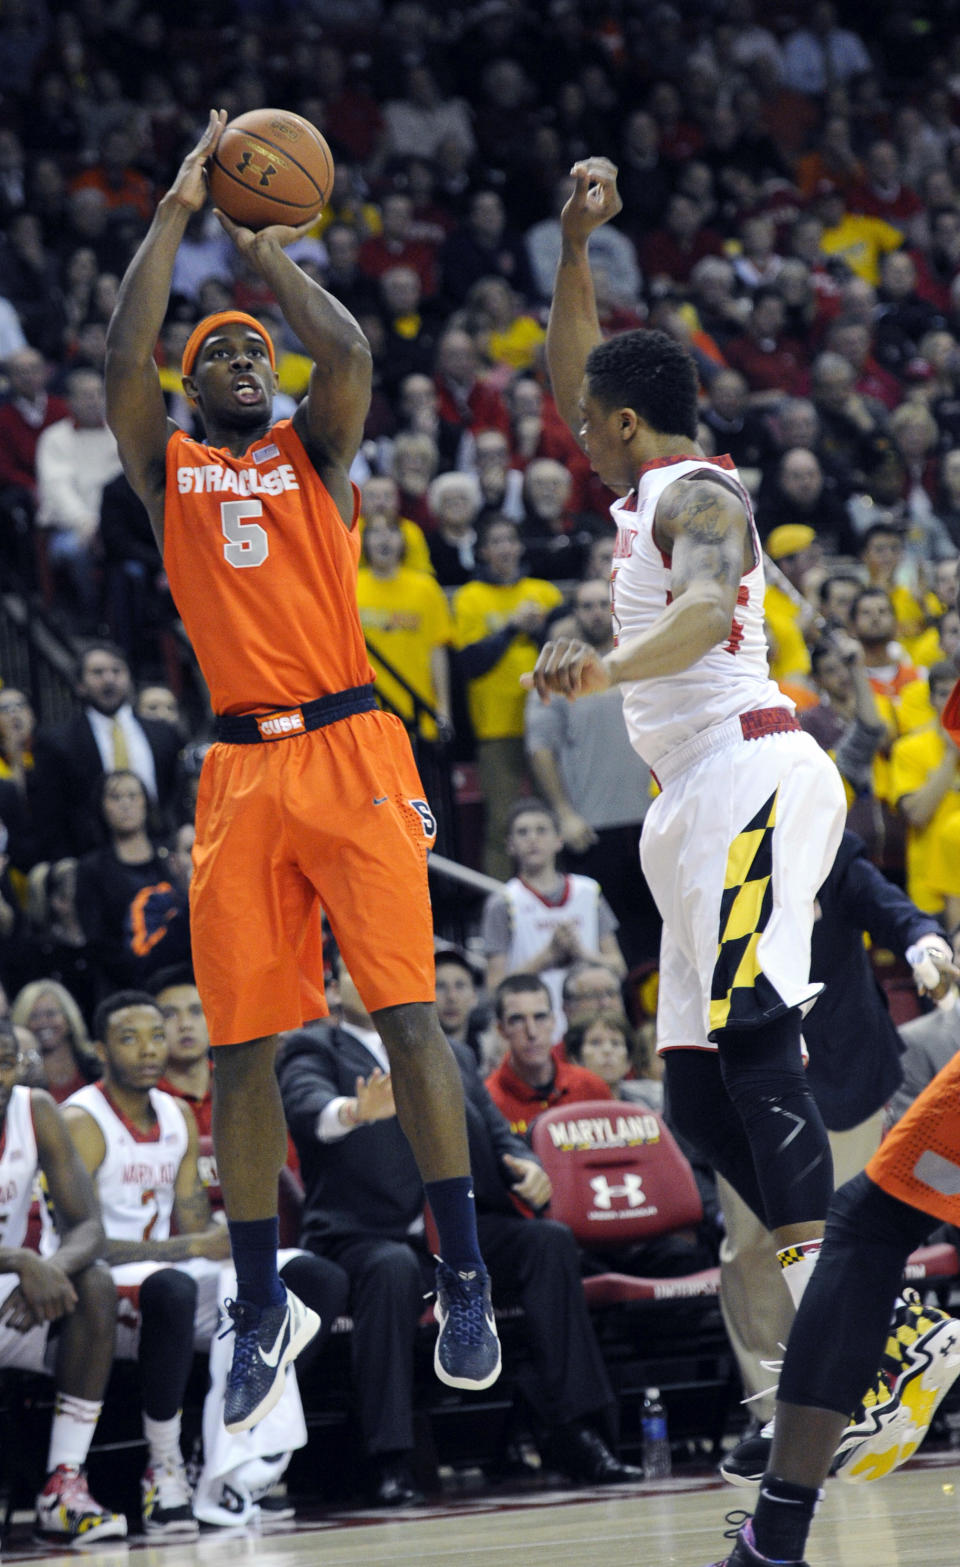 Syracuse forward C.J. Fair (5) shoots against Maryland guard Nick Faust, right, during the first half of an NCAA college basketball game, Monday, Feb. 24, 2014, in College Park, Md. (AP Photo/Nick Wass)